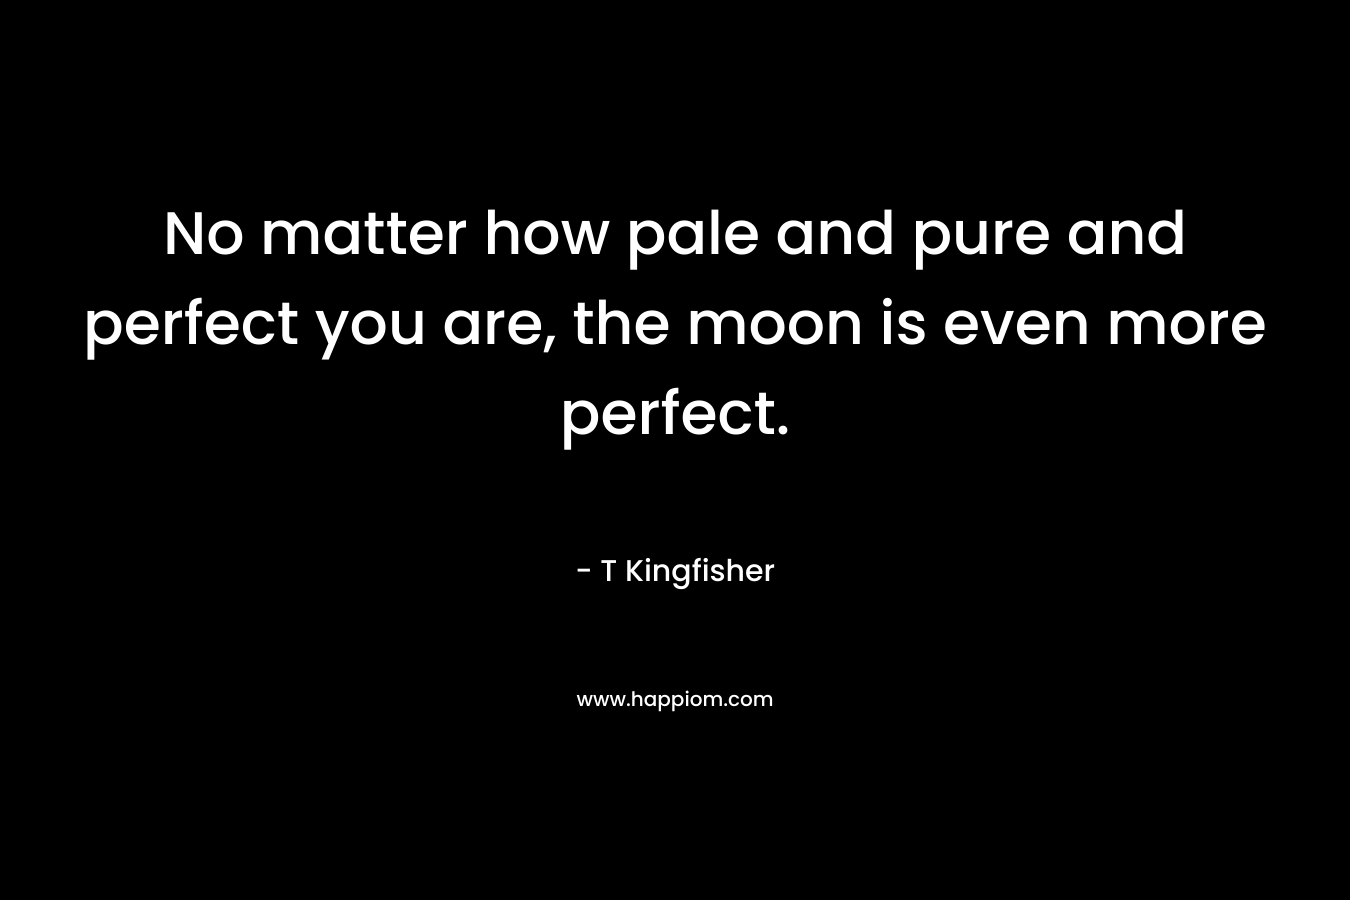 No matter how pale and pure and perfect you are, the moon is even more perfect.